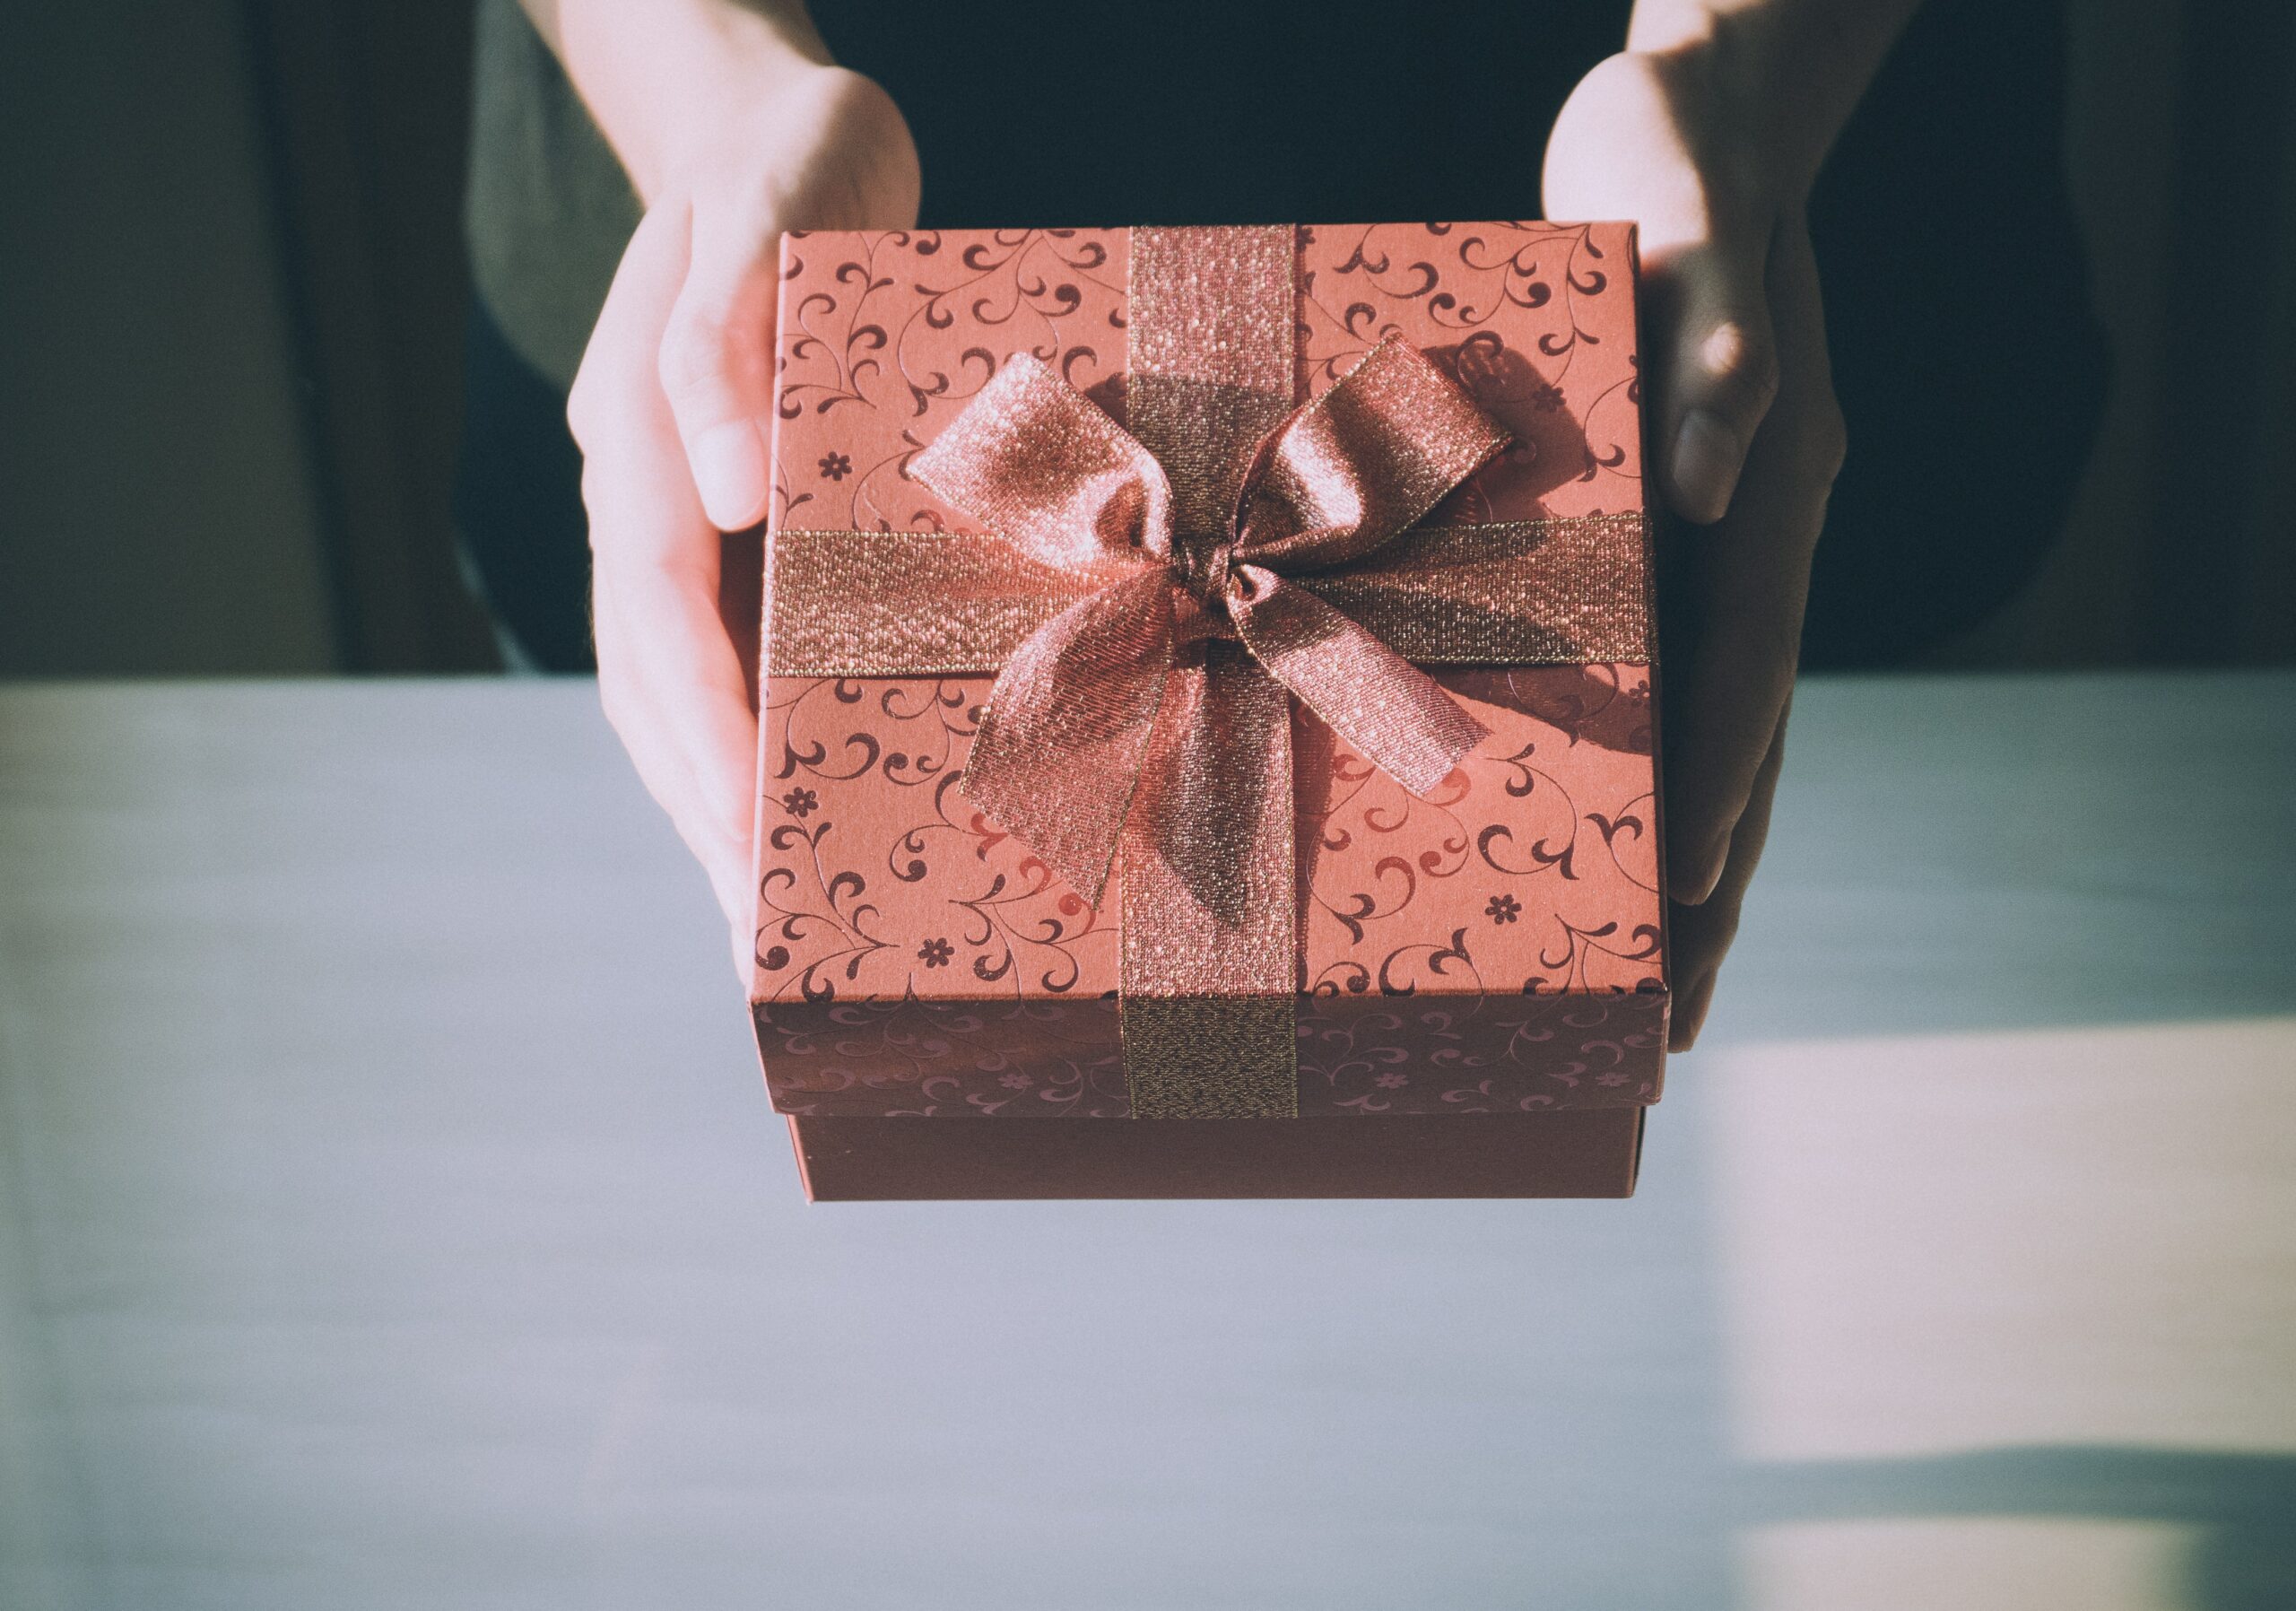 How Gifting and Joint Ownership Can Go Wrong